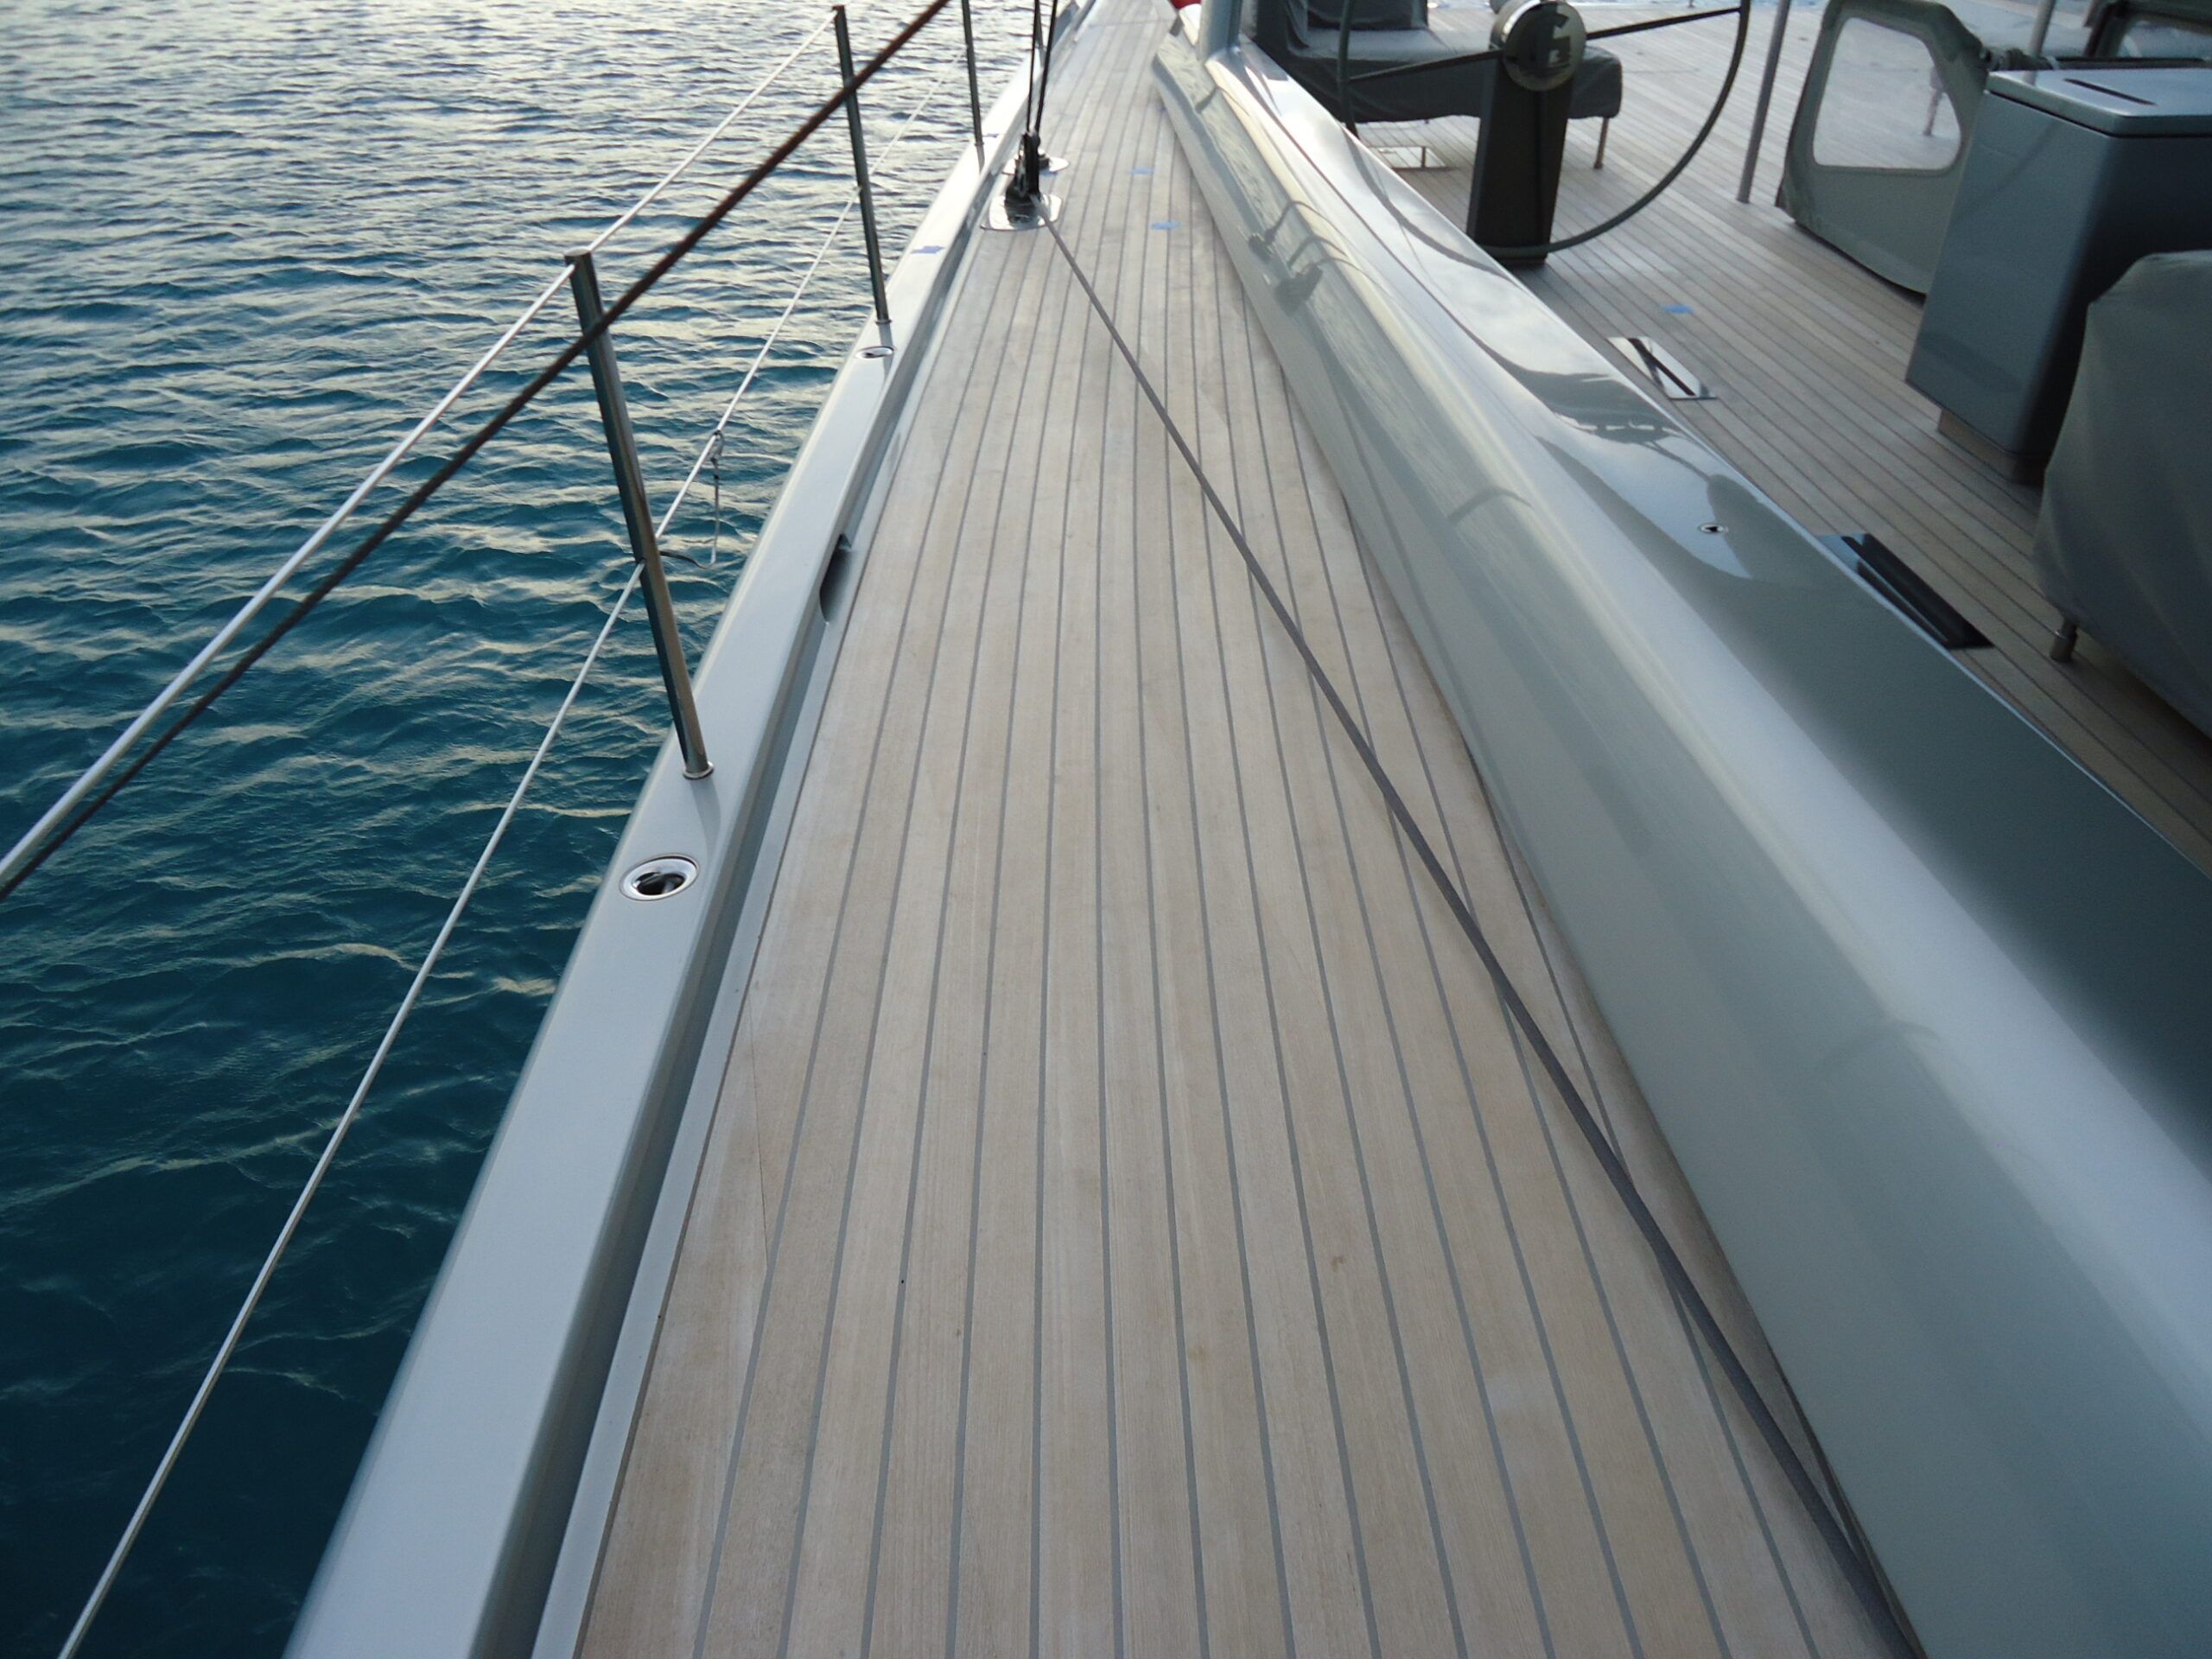 sailboat with teak decking and gray caulking on weather deck